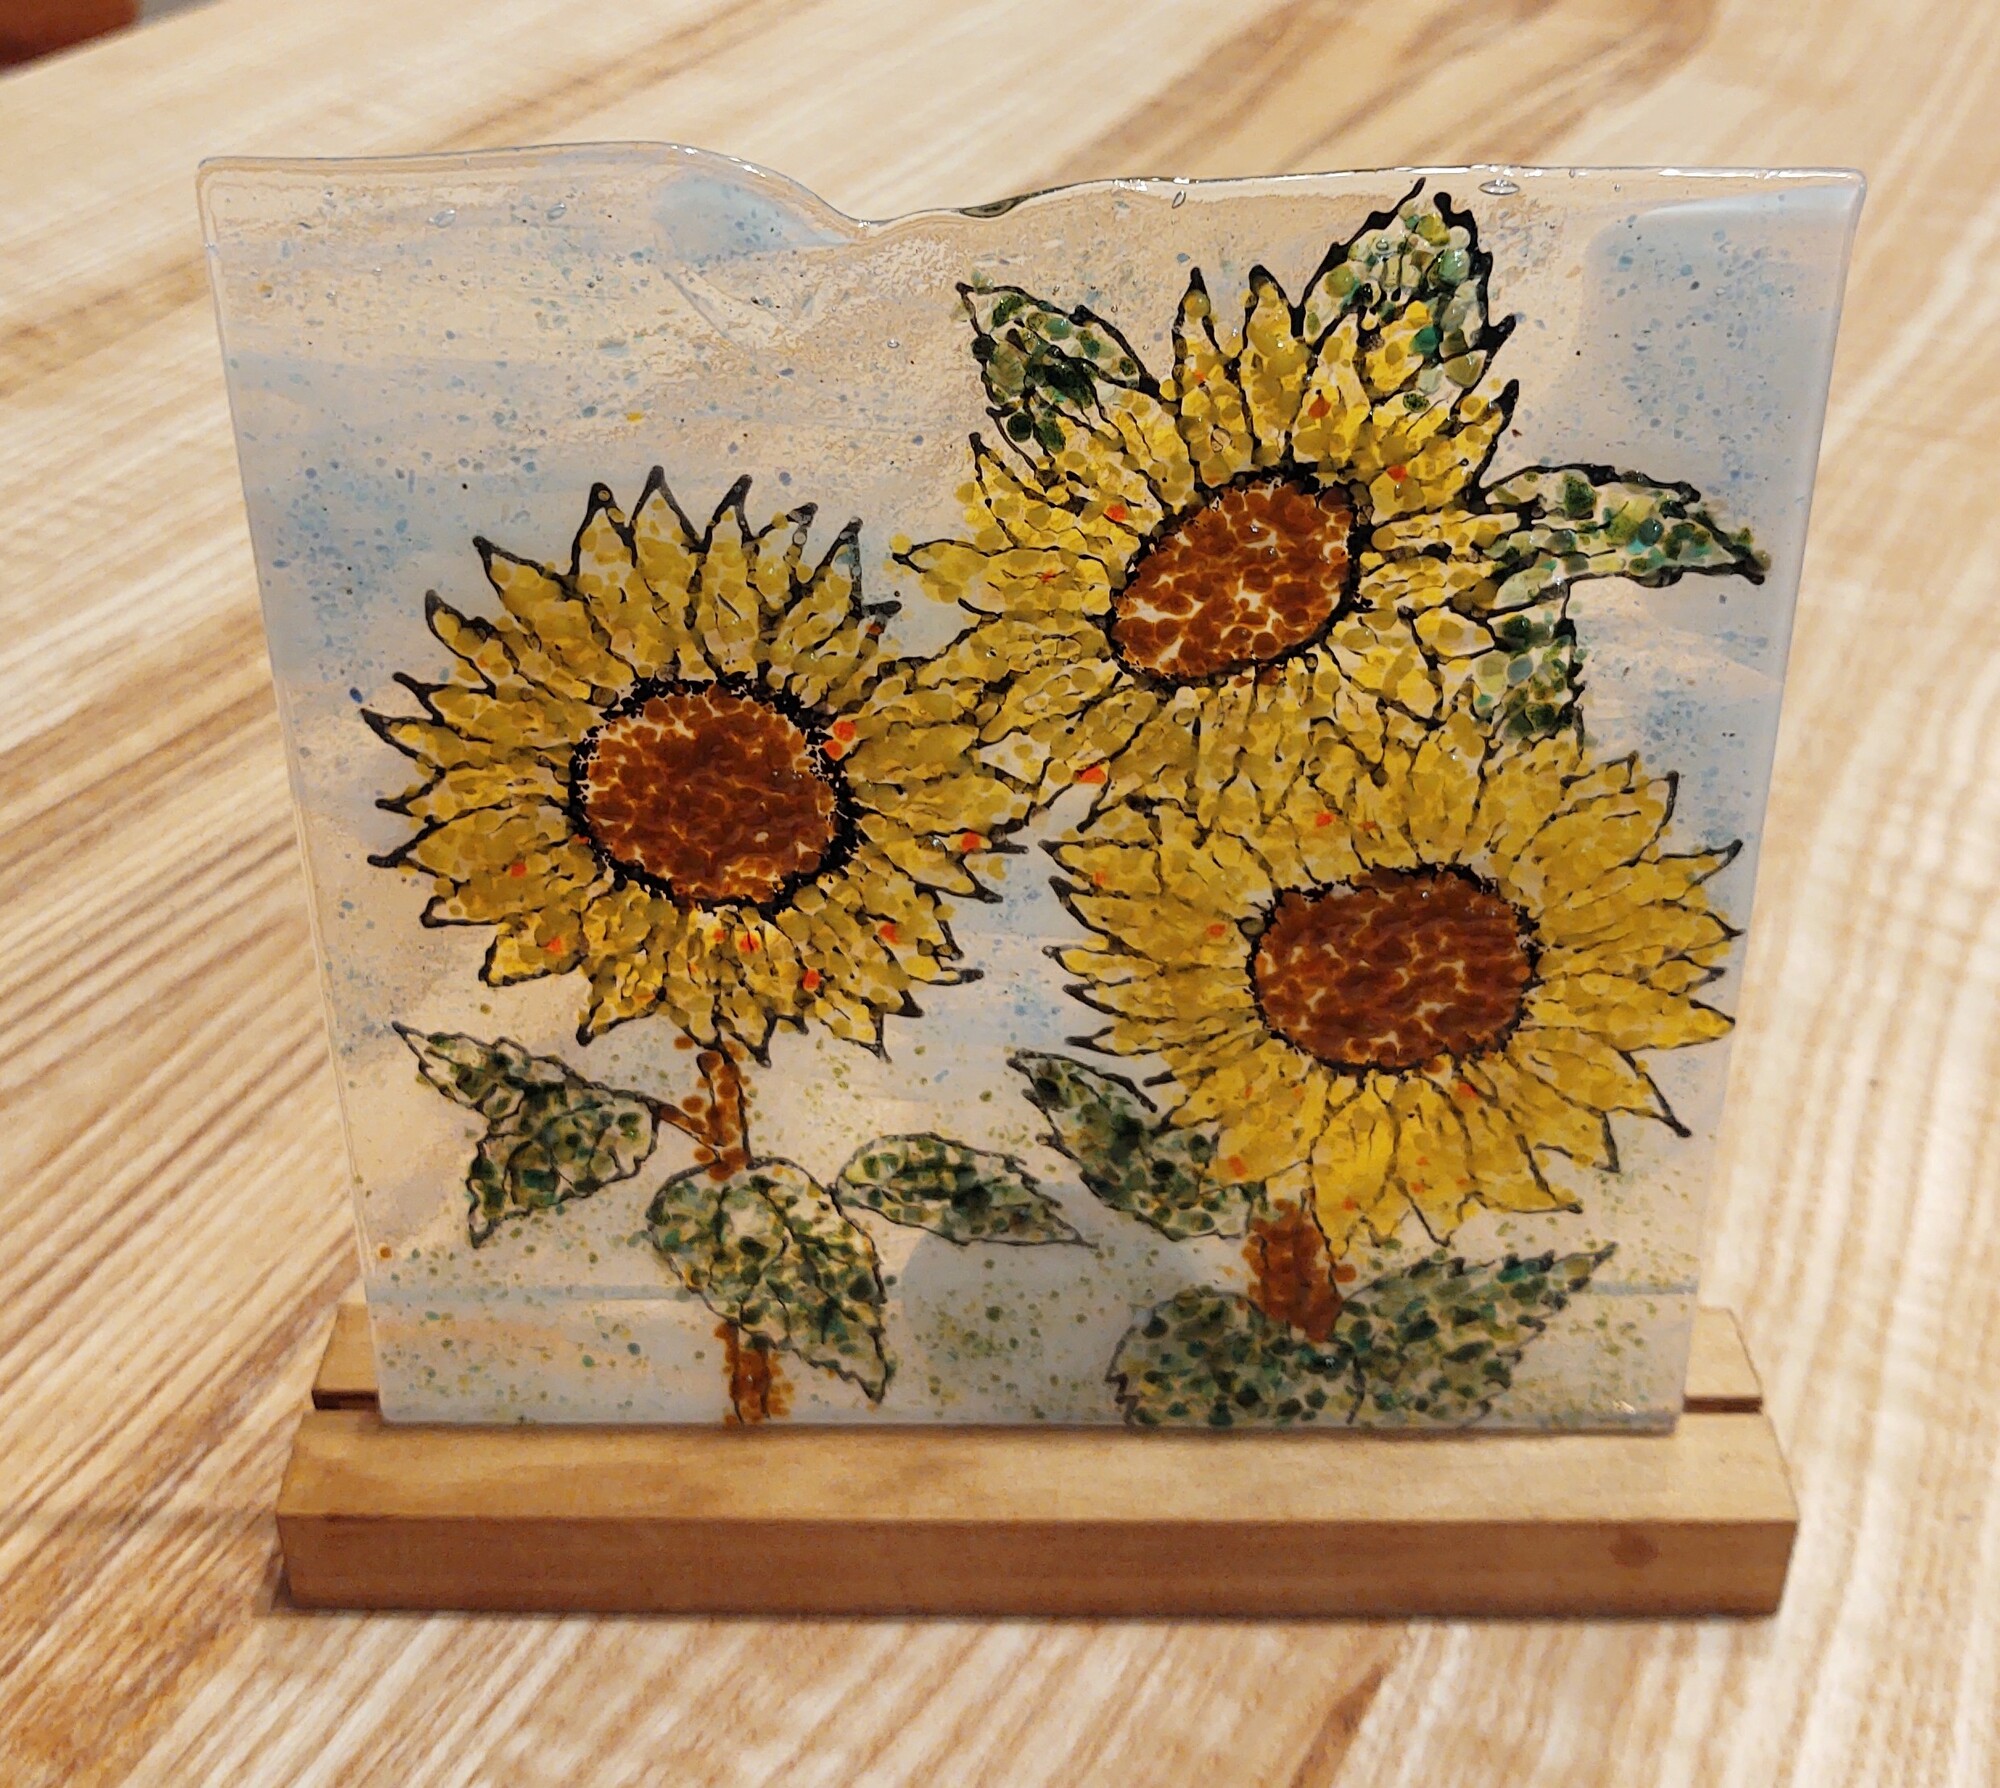 Fused Glass Art Designs
Sunflowers
7x8 inches on Wood